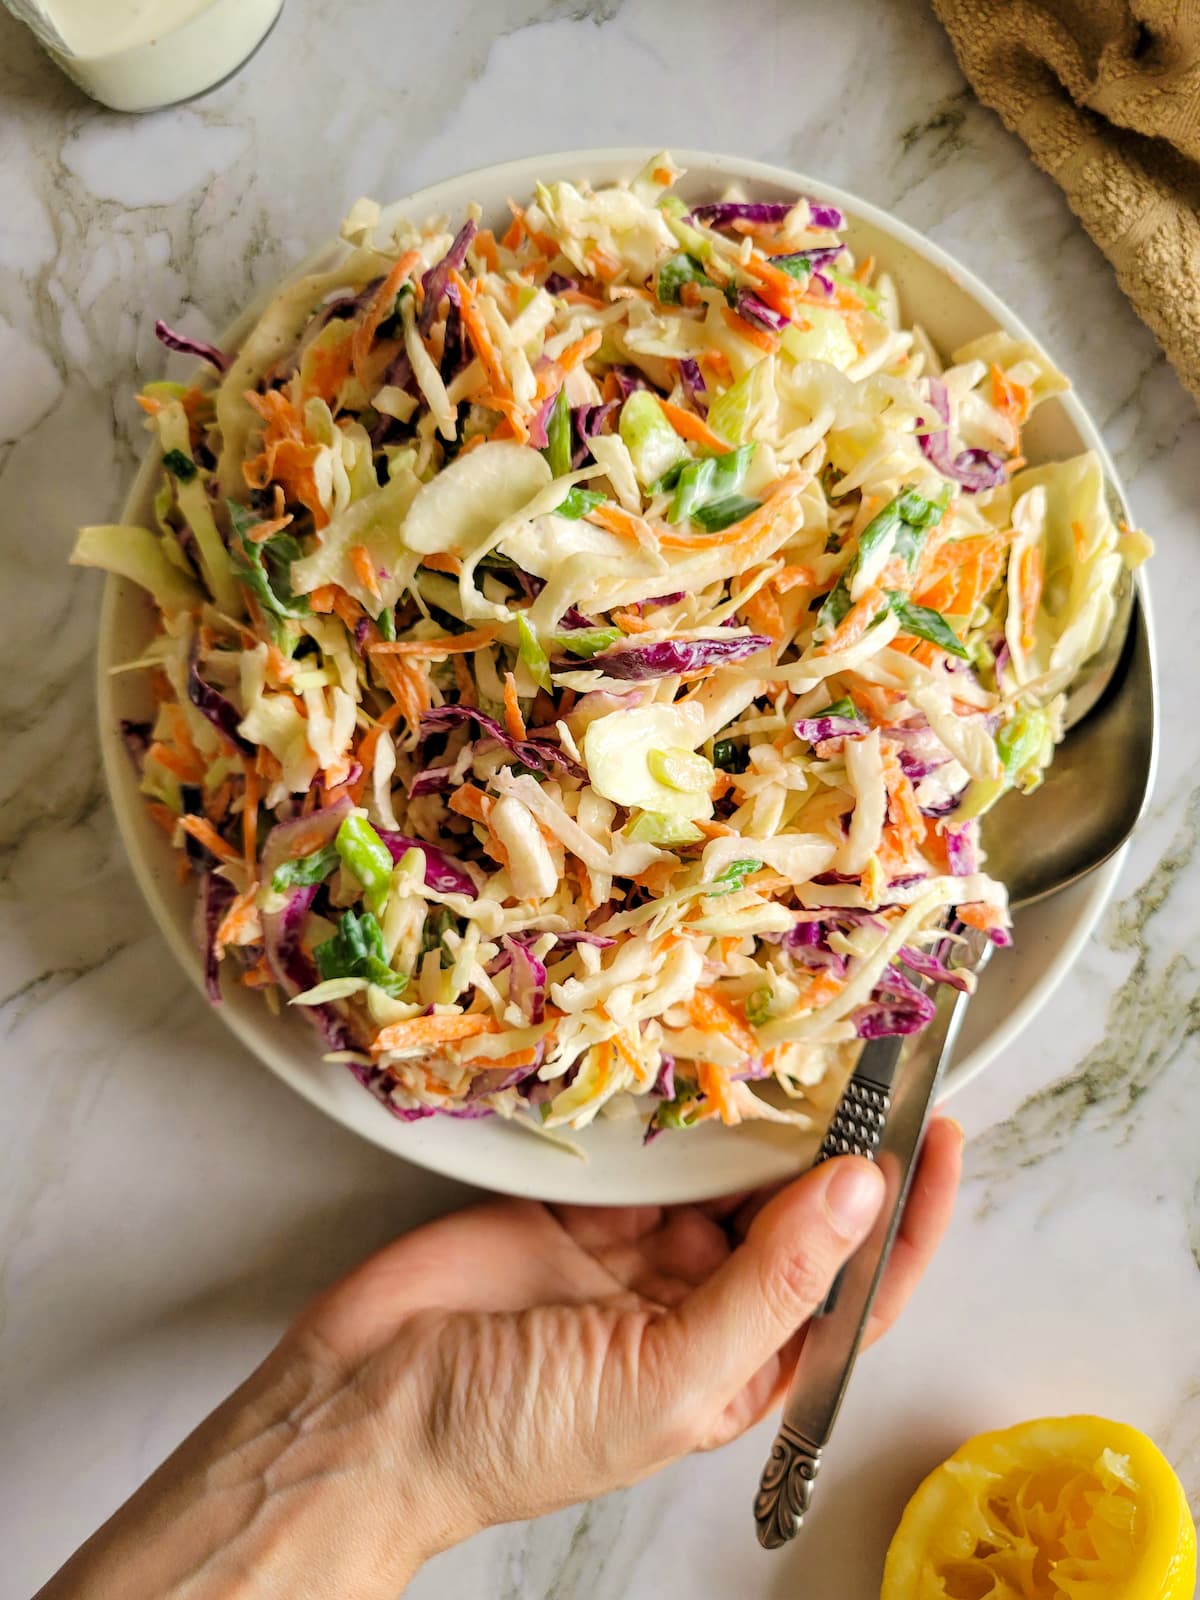 hand holding a bowl of coleslaw with two spoons, lemon on the side